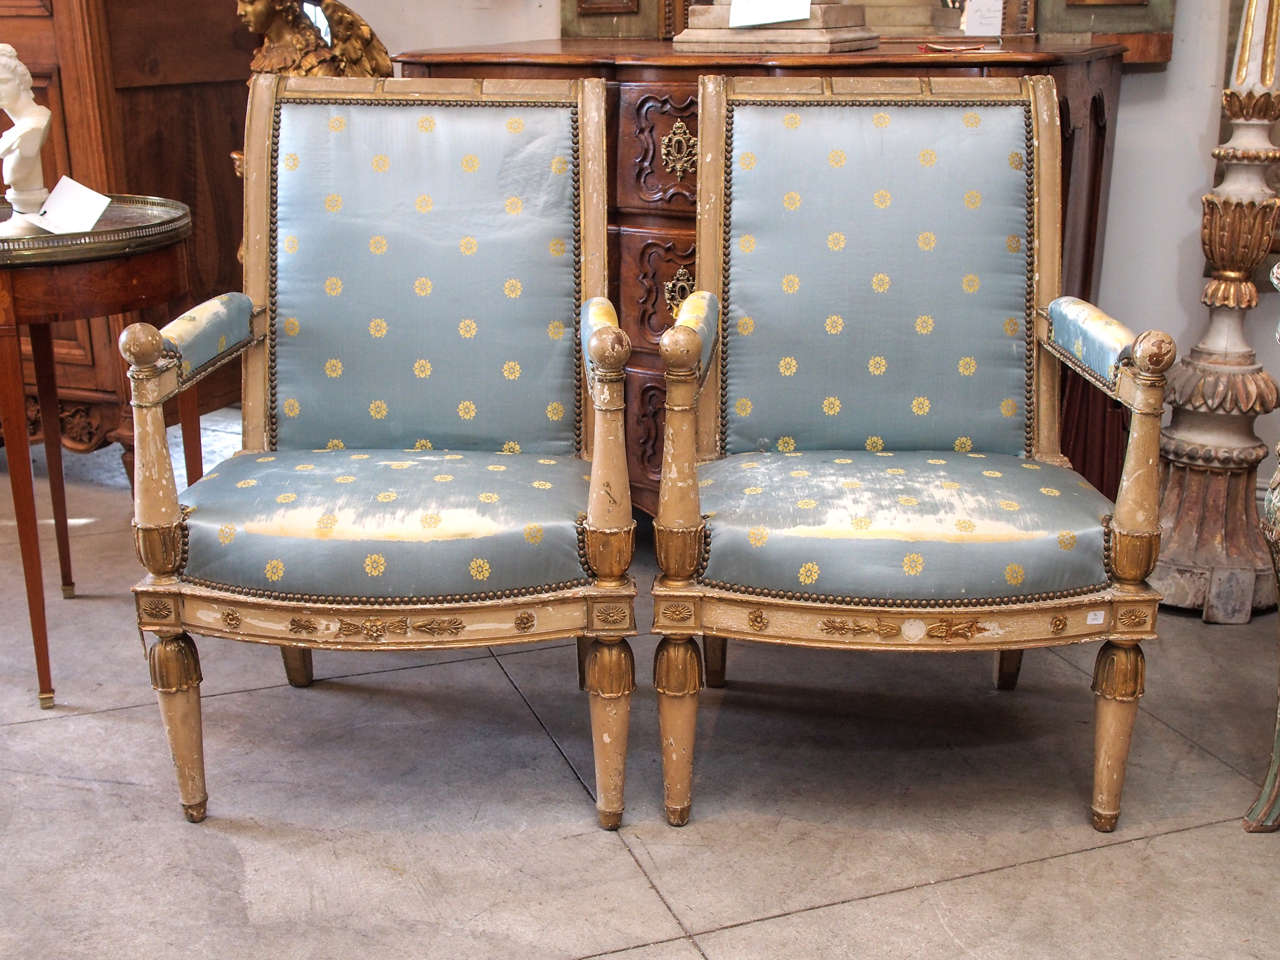 Beautifully carved and painted period consulate chairs.